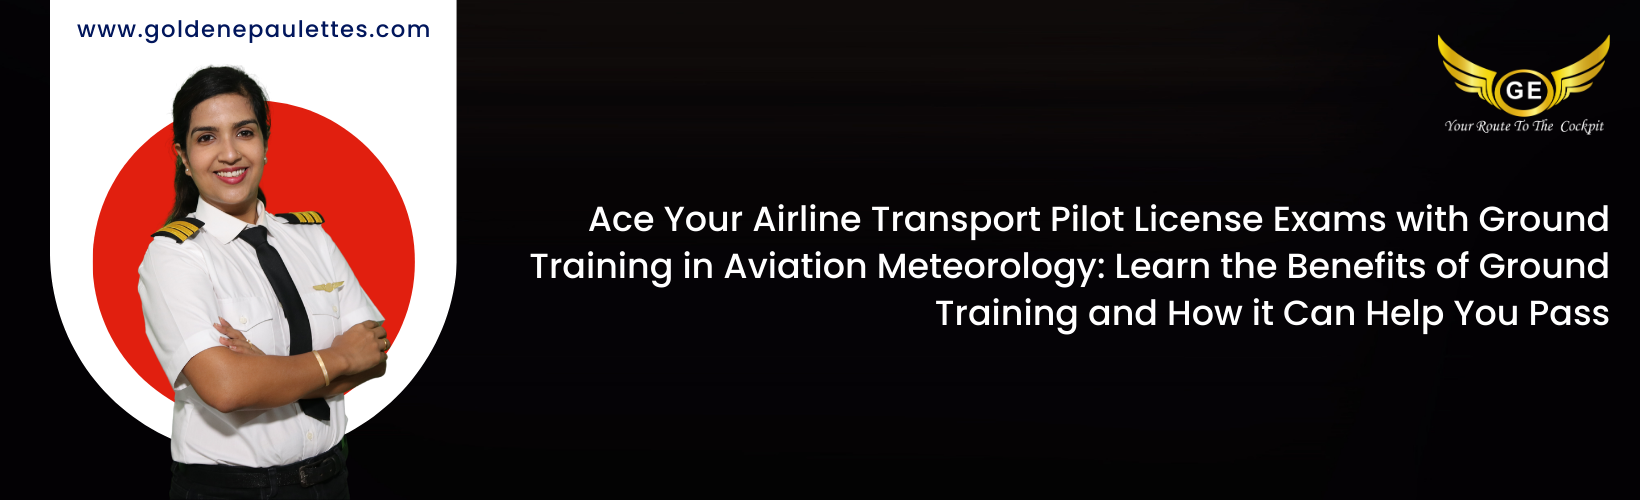 What Is Required to Take the Aviation Meteorology Course in Airline Transport Pilot License